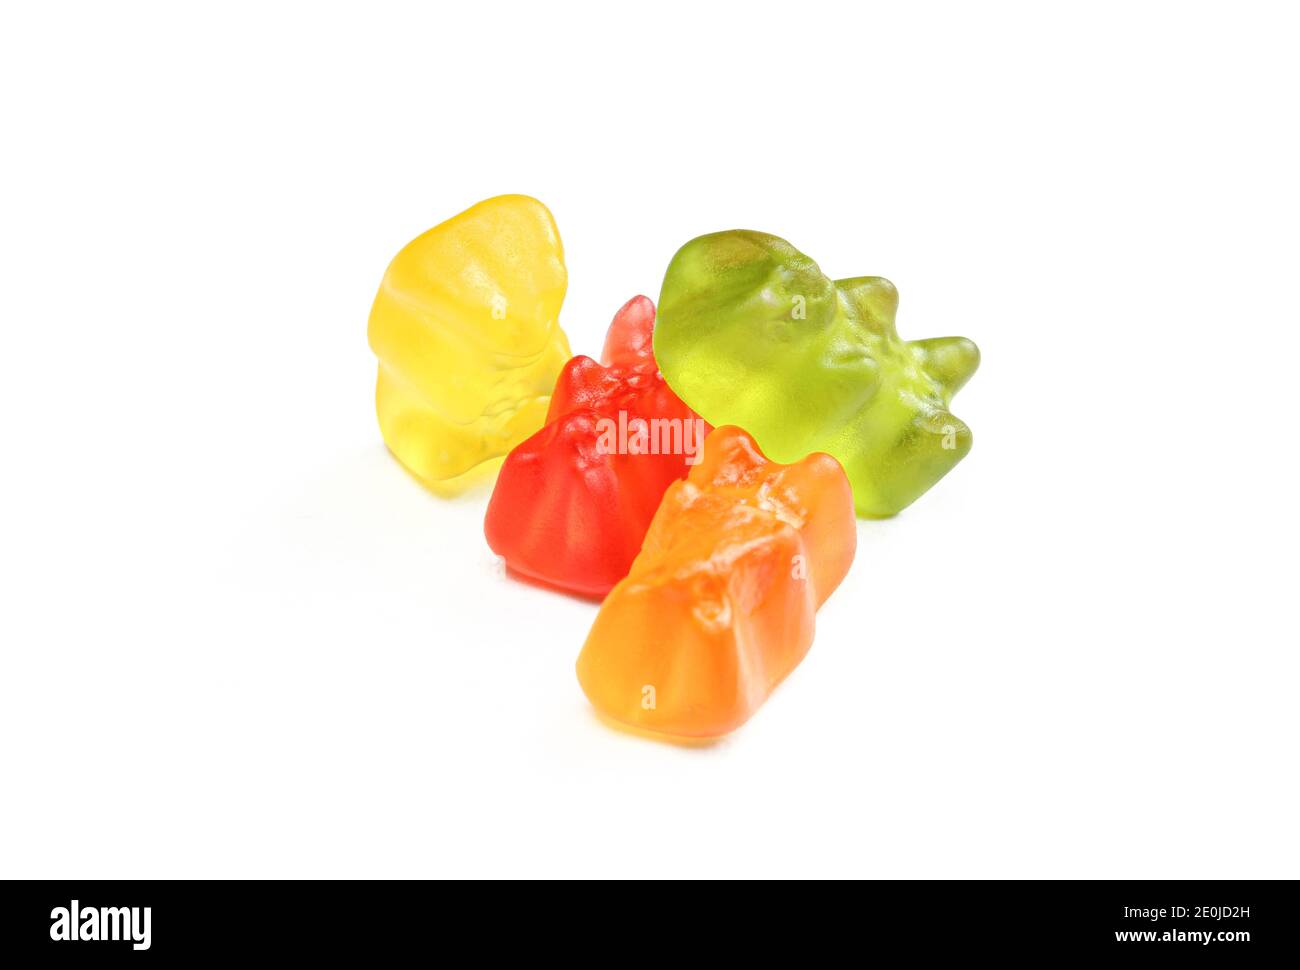 Pile of colorful gummy bears isolated on white background. Delicious jelly treats Stock Photo